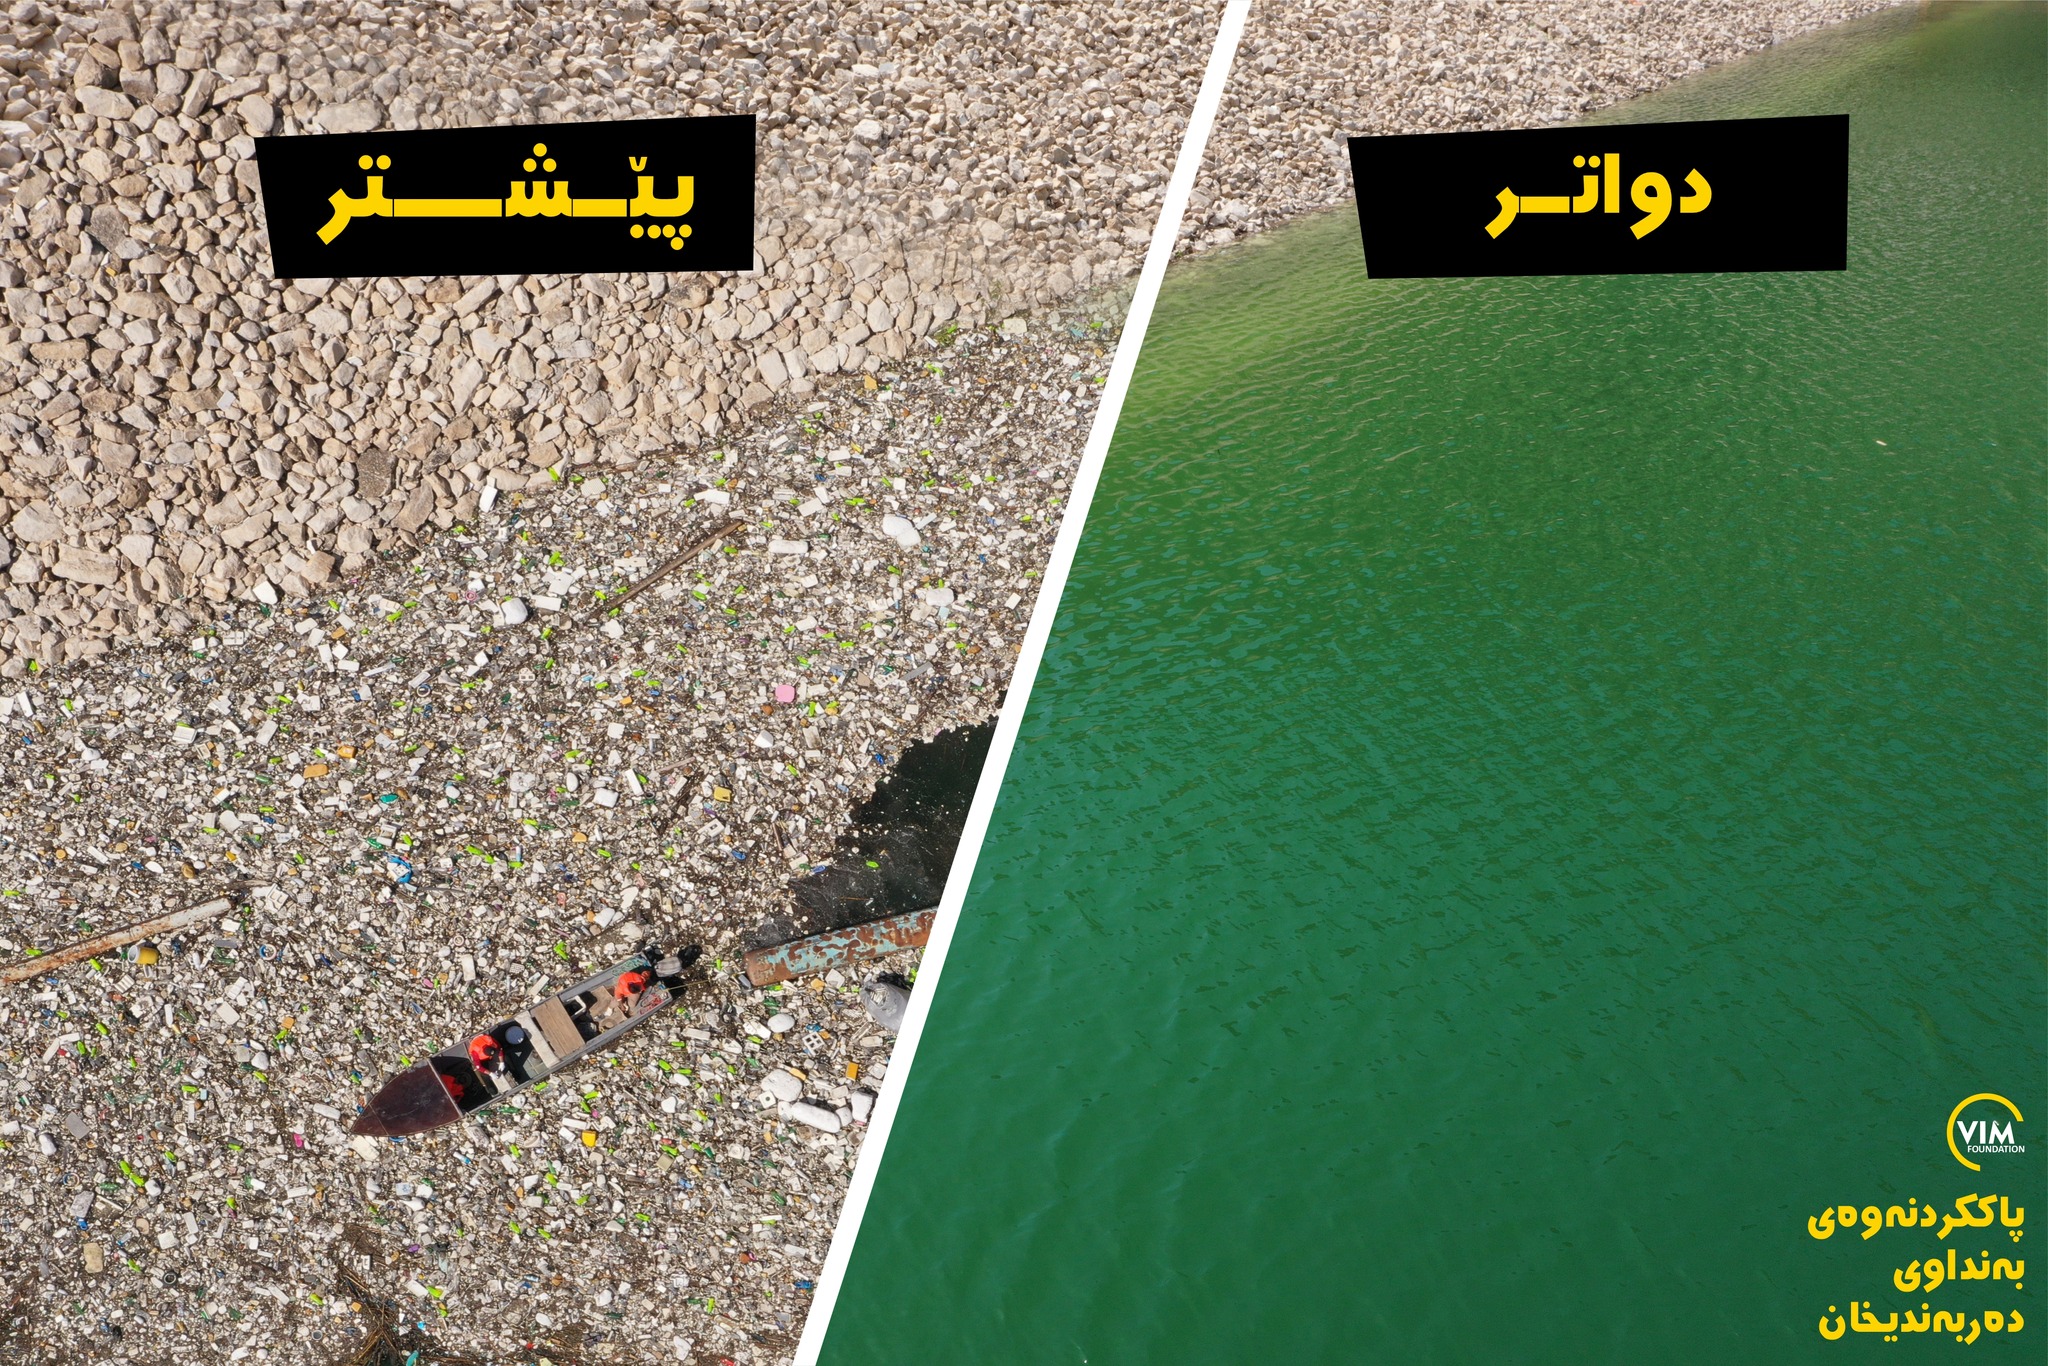 Scenes from the Darbandikhan Dam before and after the cleanup campaign by Vim Foundation.